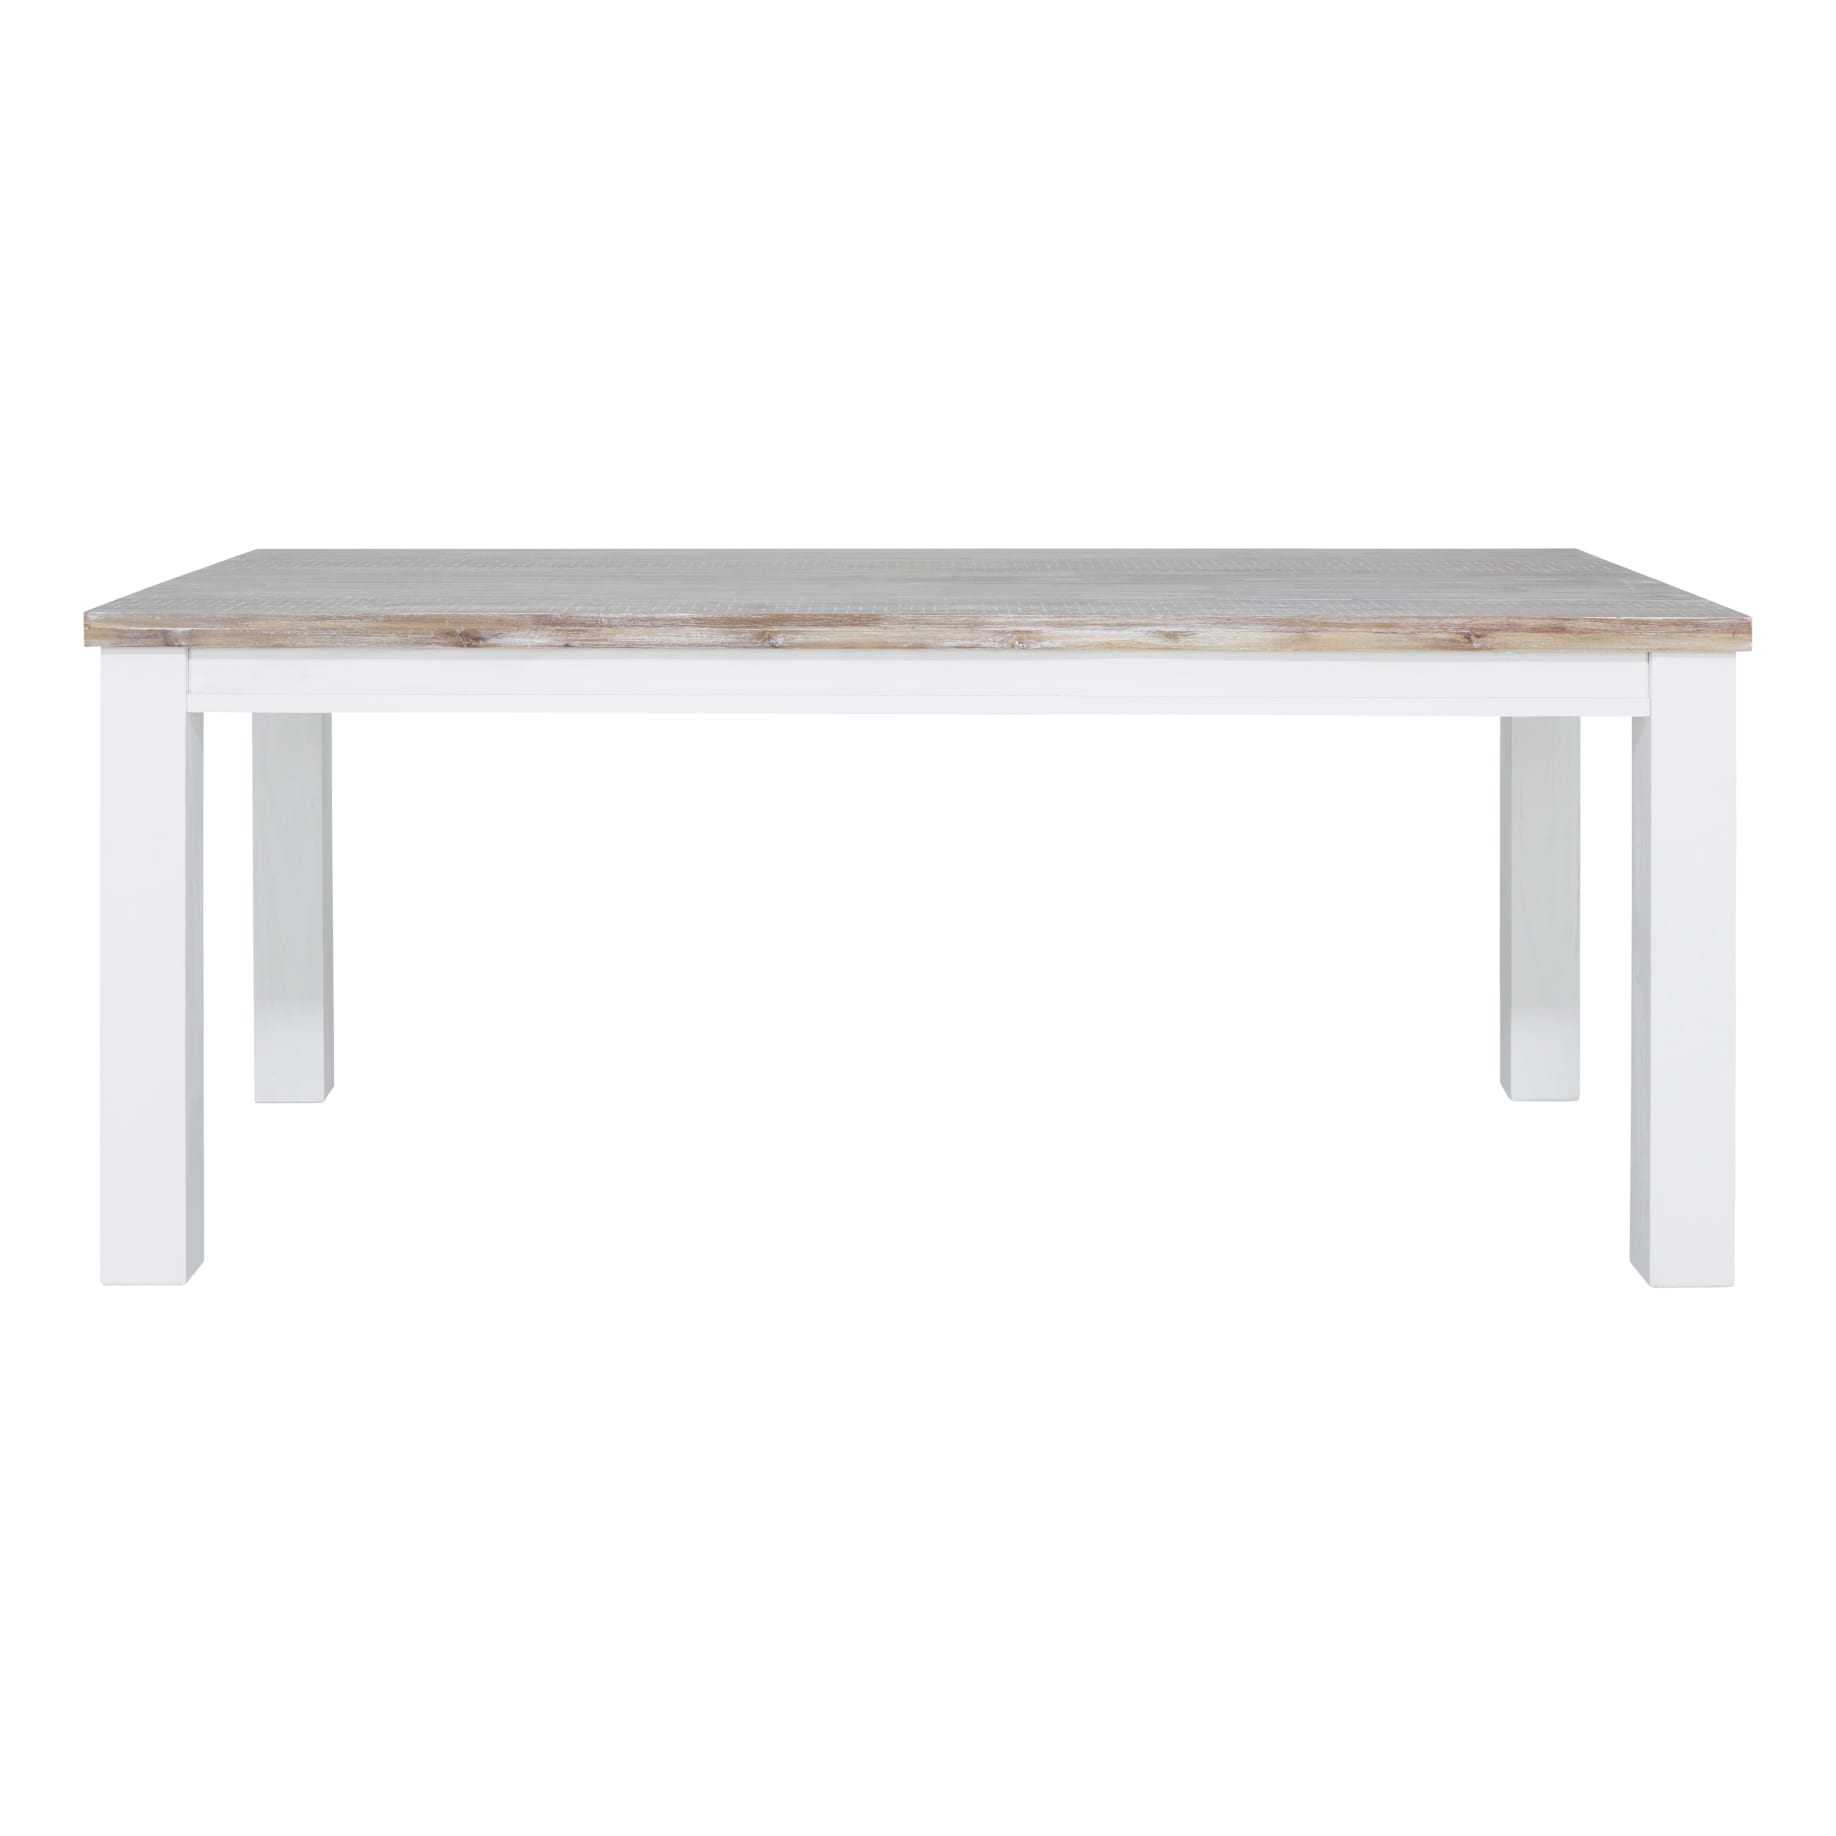 Halifax Dining Table 190cm in Acacia Grey / White